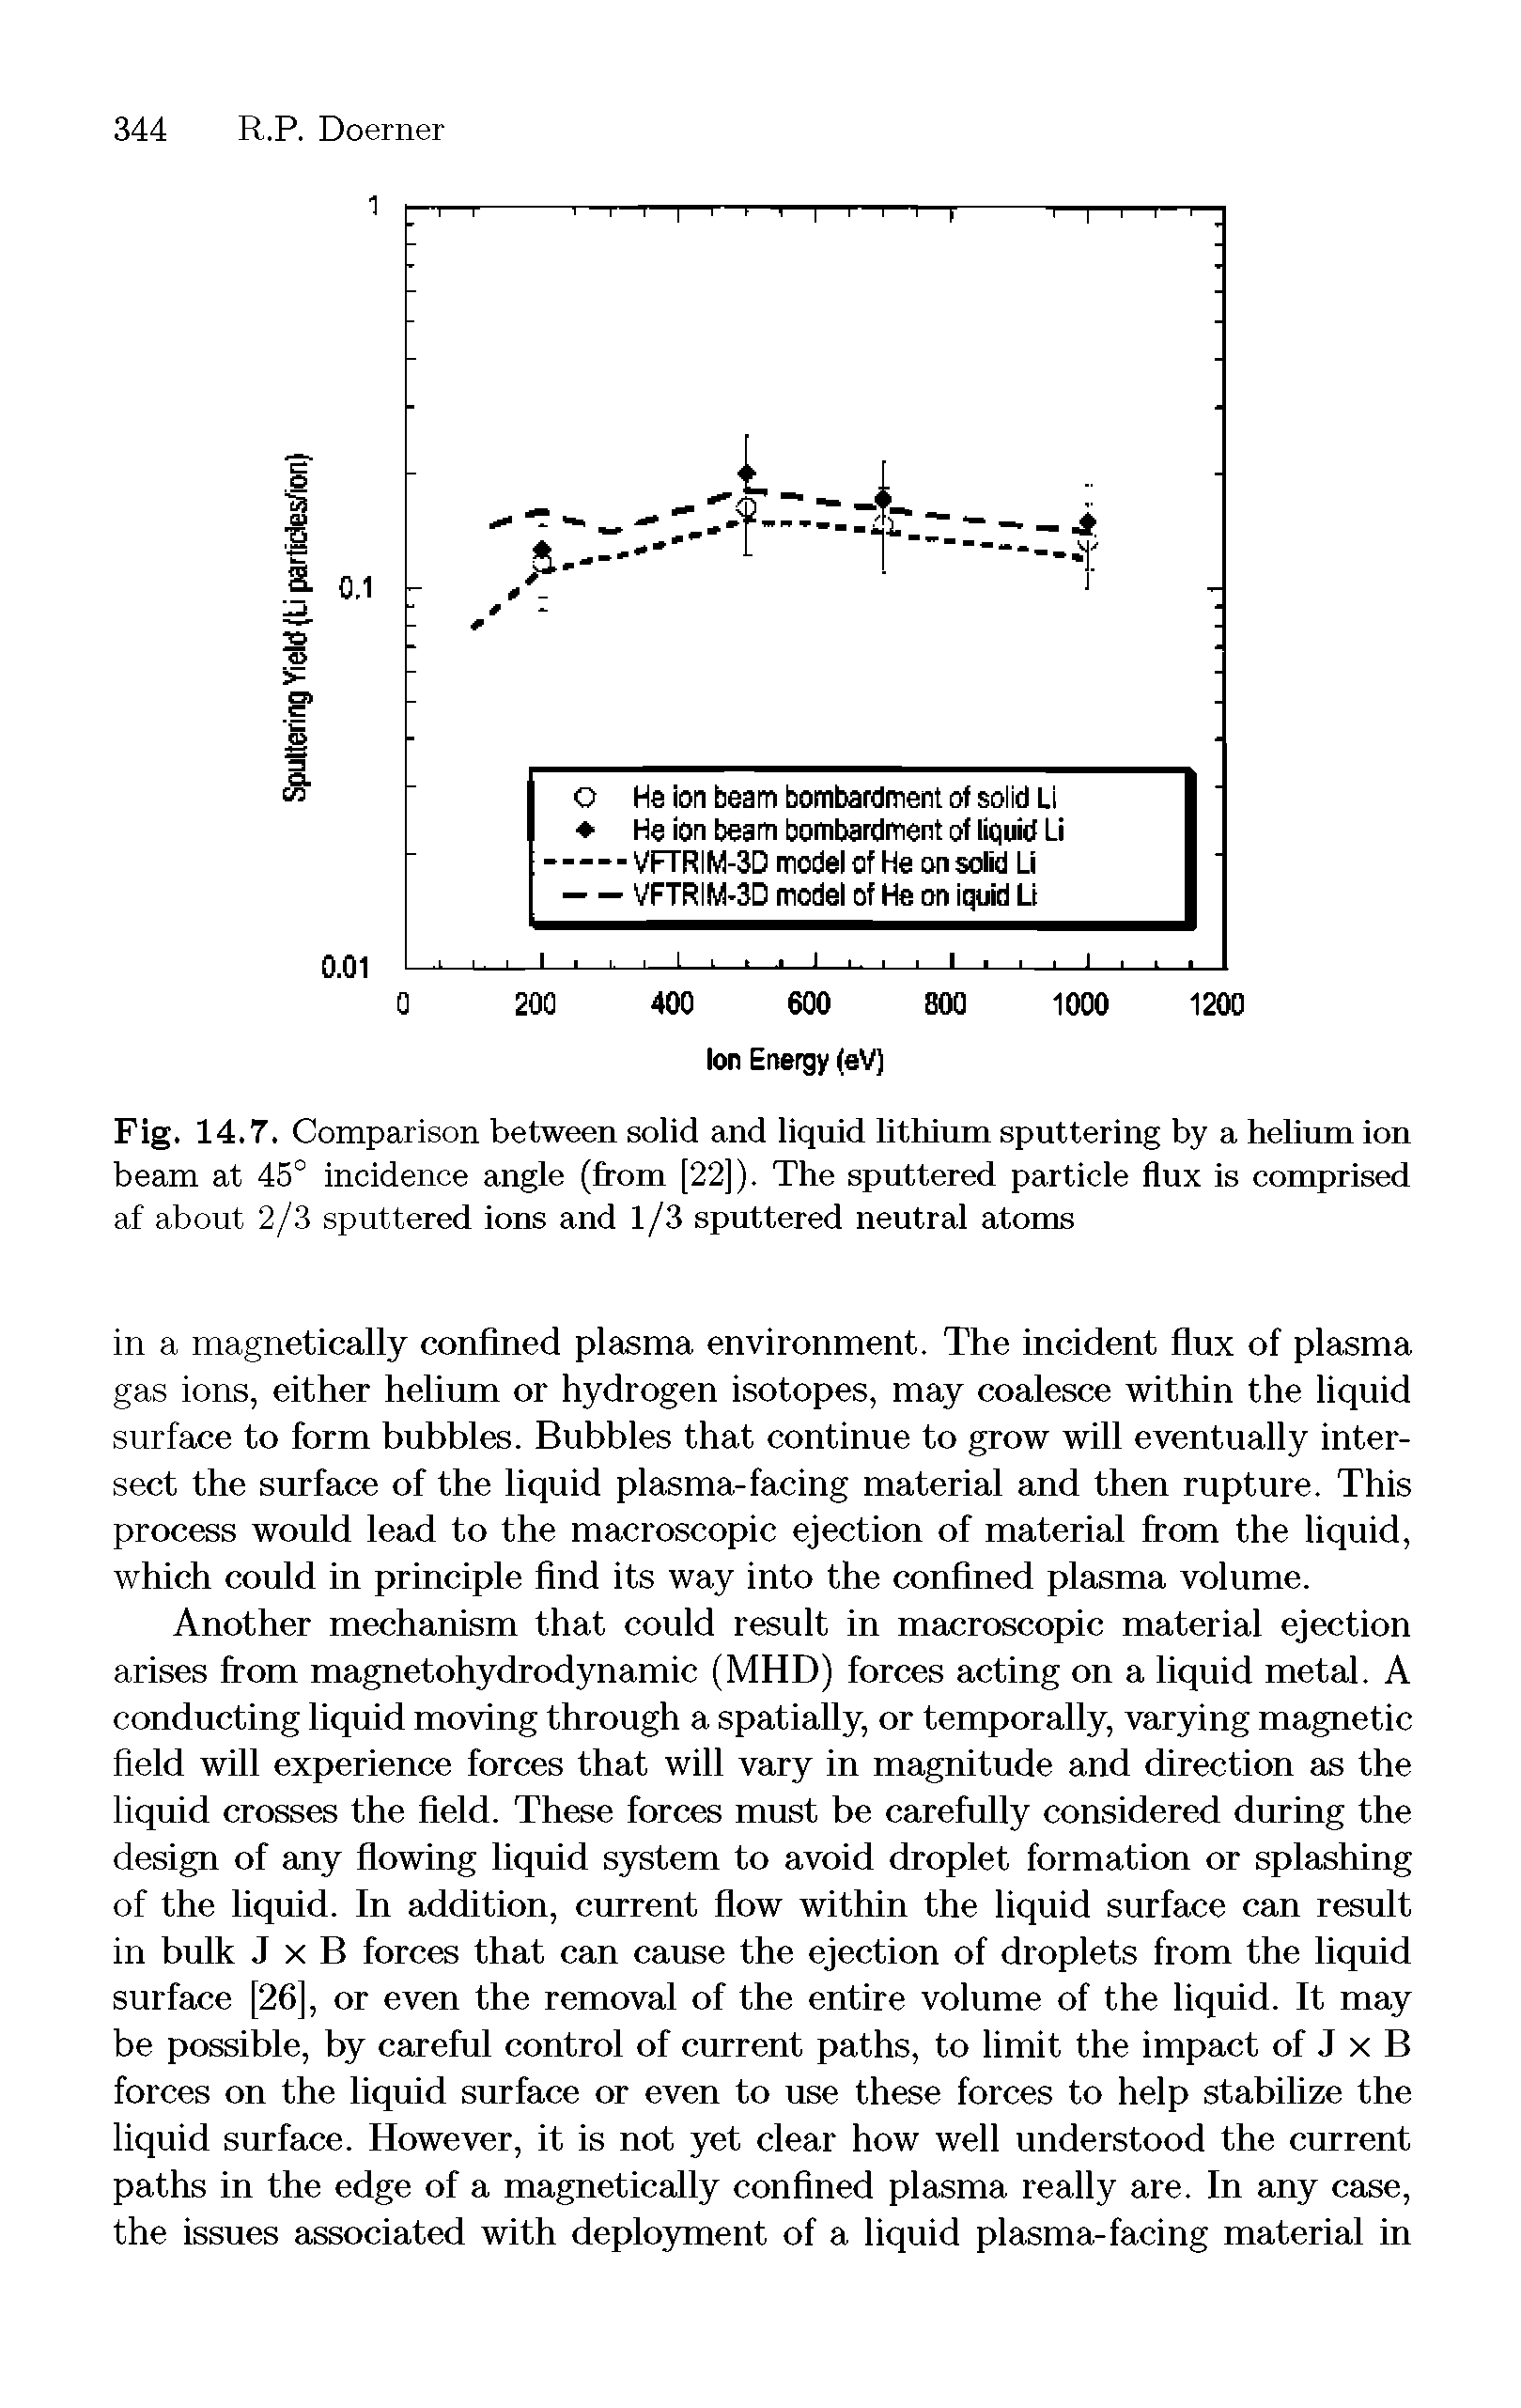 Fig. 14.7. Comparison between solid and liquid lithium sputtering by a helium ion beam at 45° incidence angle (from [22]). The sputtered particle flux is comprised af about 2/3 sputtered ions and 1/3 sputtered neutral atoms...